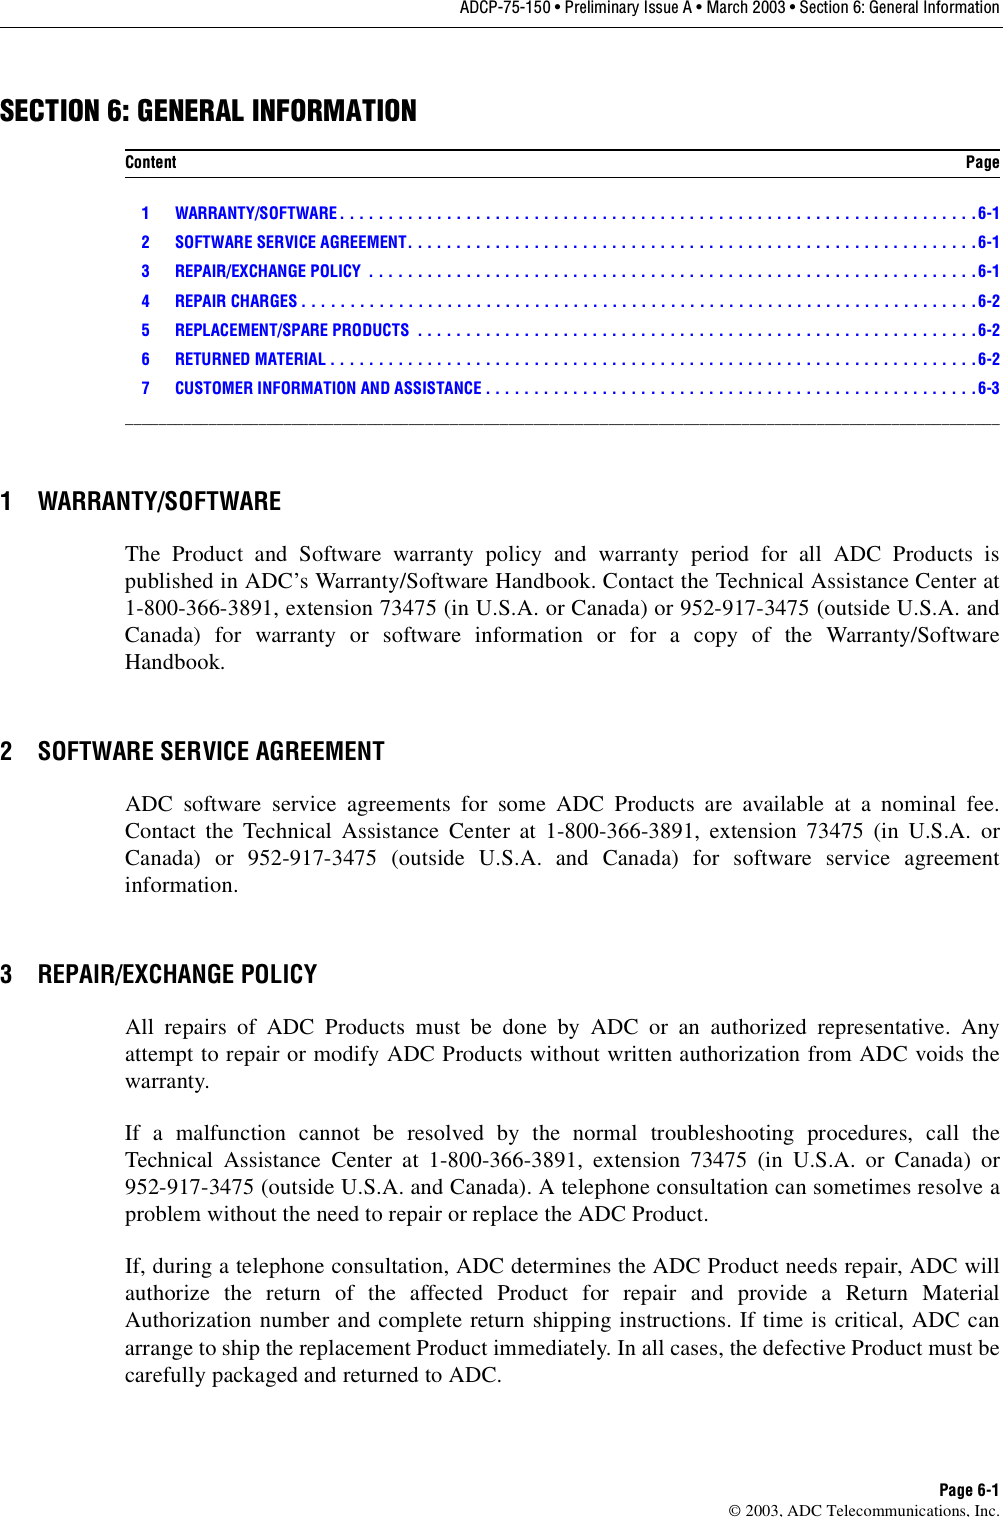 ADCP-75-150 • Preliminary Issue A • March 2003 • Section 6: General InformationPage 6-1©2003, ADC Telecommunications, Inc.SECTION 6: GENERAL INFORMATION1 WARRANTY/SOFTWARE . . . . . . . . . . . . . . . . . . . . . . . . . . . . . . . . . . . . . . . . . . . . . . . . . . . . . . . . . . . . . . . . . .6-12 SOFTWARE SERVICE AGREEMENT. . . . . . . . . . . . . . . . . . . . . . . . . . . . . . . . . . . . . . . . . . . . . . . . . . . . . . . . . . .6-13 REPAIR/EXCHANGE POLICY  . . . . . . . . . . . . . . . . . . . . . . . . . . . . . . . . . . . . . . . . . . . . . . . . . . . . . . . . . . . . . . .6-14 REPAIR CHARGES . . . . . . . . . . . . . . . . . . . . . . . . . . . . . . . . . . . . . . . . . . . . . . . . . . . . . . . . . . . . . . . . . . . . . .6-25 REPLACEMENT/SPARE PRODUCTS  . . . . . . . . . . . . . . . . . . . . . . . . . . . . . . . . . . . . . . . . . . . . . . . . . . . . . . . . . .6-26 RETURNED MATERIAL . . . . . . . . . . . . . . . . . . . . . . . . . . . . . . . . . . . . . . . . . . . . . . . . . . . . . . . . . . . . . . . . . . .6-27 CUSTOMER INFORMATION AND ASSISTANCE . . . . . . . . . . . . . . . . . . . . . . . . . . . . . . . . . . . . . . . . . . . . . . . . . . .6-3_________________________________________________________________________________________________________1 WARRANTY/SOFTWAREThe Product and Software warranty policy and warranty period for all ADC Products ispublished in ADC’s Warranty/Software Handbook. Contact the Technical Assistance Center at1-800-366-3891, extension 73475 (in U.S.A. or Canada) or 952-917-3475 (outside U.S.A. andCanada) for warranty or software information or for acopy of the Warranty/SoftwareHandbook.2 SOFTWARE SERVICE AGREEMENTADC software service agreements for some ADC Products are available at anominal fee.Contact the Technical Assistance Center at 1-800-366-3891, extension 73475 (in U.S.A. orCanada) or 952-917-3475 (outside U.S.A. and Canada) for software service agreementinformation.3 REPAIR/EXCHANGE POLICYAll repairs of ADC Products must be done by ADC or an authorized representative. Anyattempt to repair or modify ADC Products without written authorization from ADC voids thewarranty.If amalfunction cannot be resolved by the normal troubleshooting procedures, call theTechnical Assistance Center at 1-800-366-3891, extension 73475 (in U.S.A. or Canada) or952-917-3475 (outside U.S.A. and Canada). Atelephone consultation can sometimes resolve aproblem without the need to repair or replace the ADC Product.If, during atelephone consultation, ADC determines the ADC Product needs repair, ADC willauthorize the return of the affected Product for repair and provide aReturn MaterialAuthorization number and complete return shipping instructions. If time is critical, ADC canarrange to ship the replacement Product immediately. In all cases, the defective Product must becarefully packaged and returned to ADC.Content Page